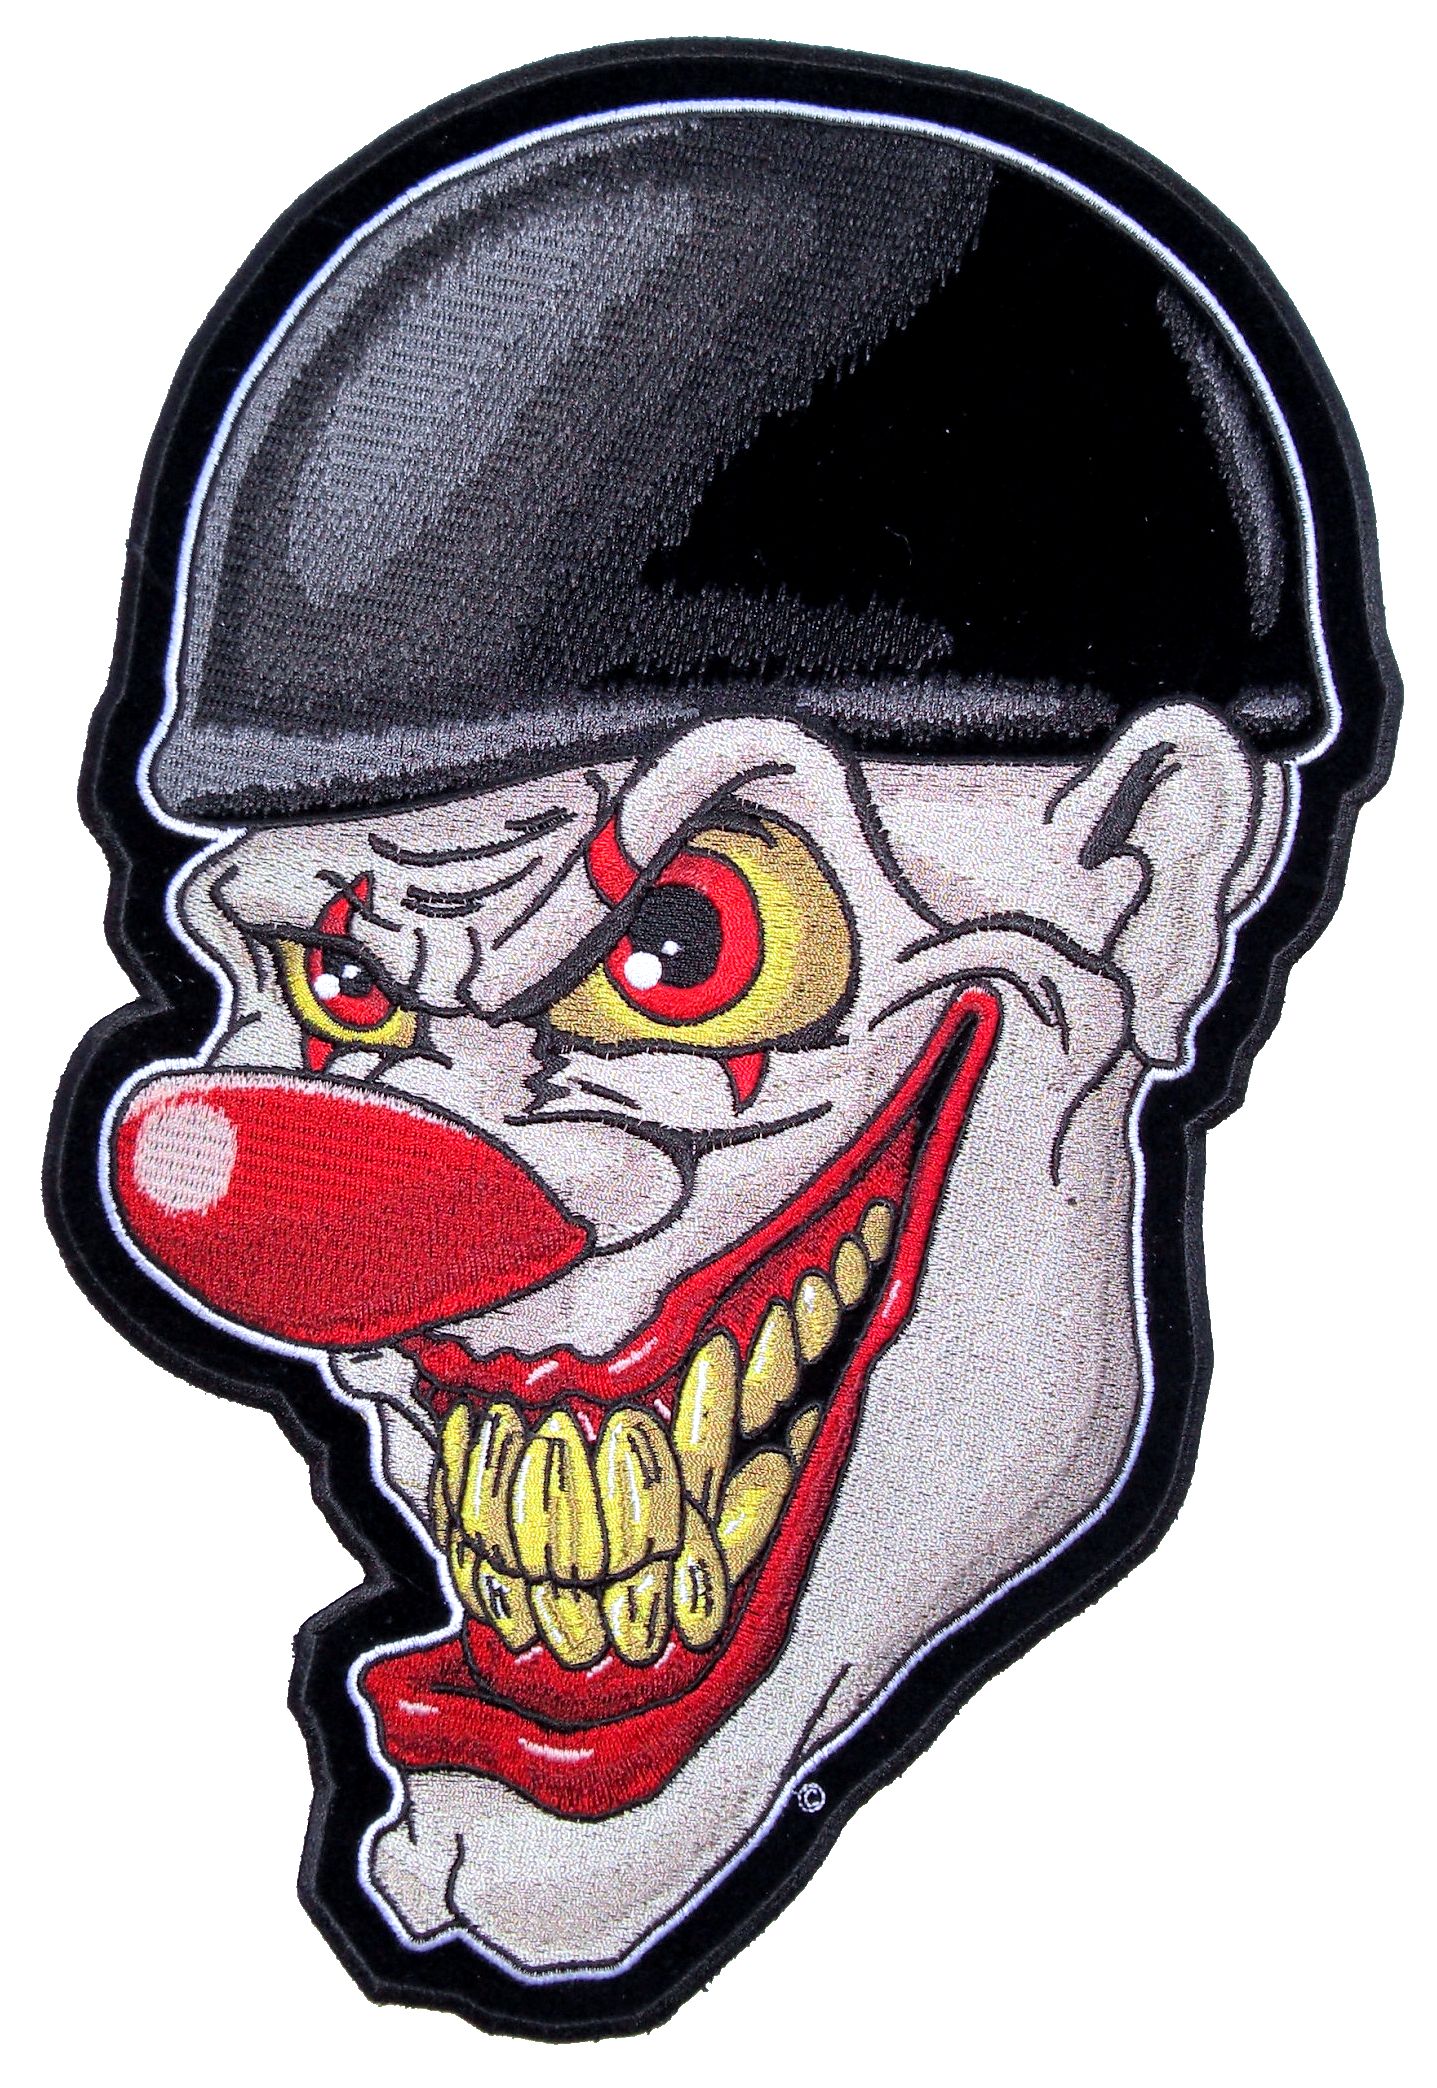 JESTER FACE EMBROIDERED 11 INCH BIKER PATCH